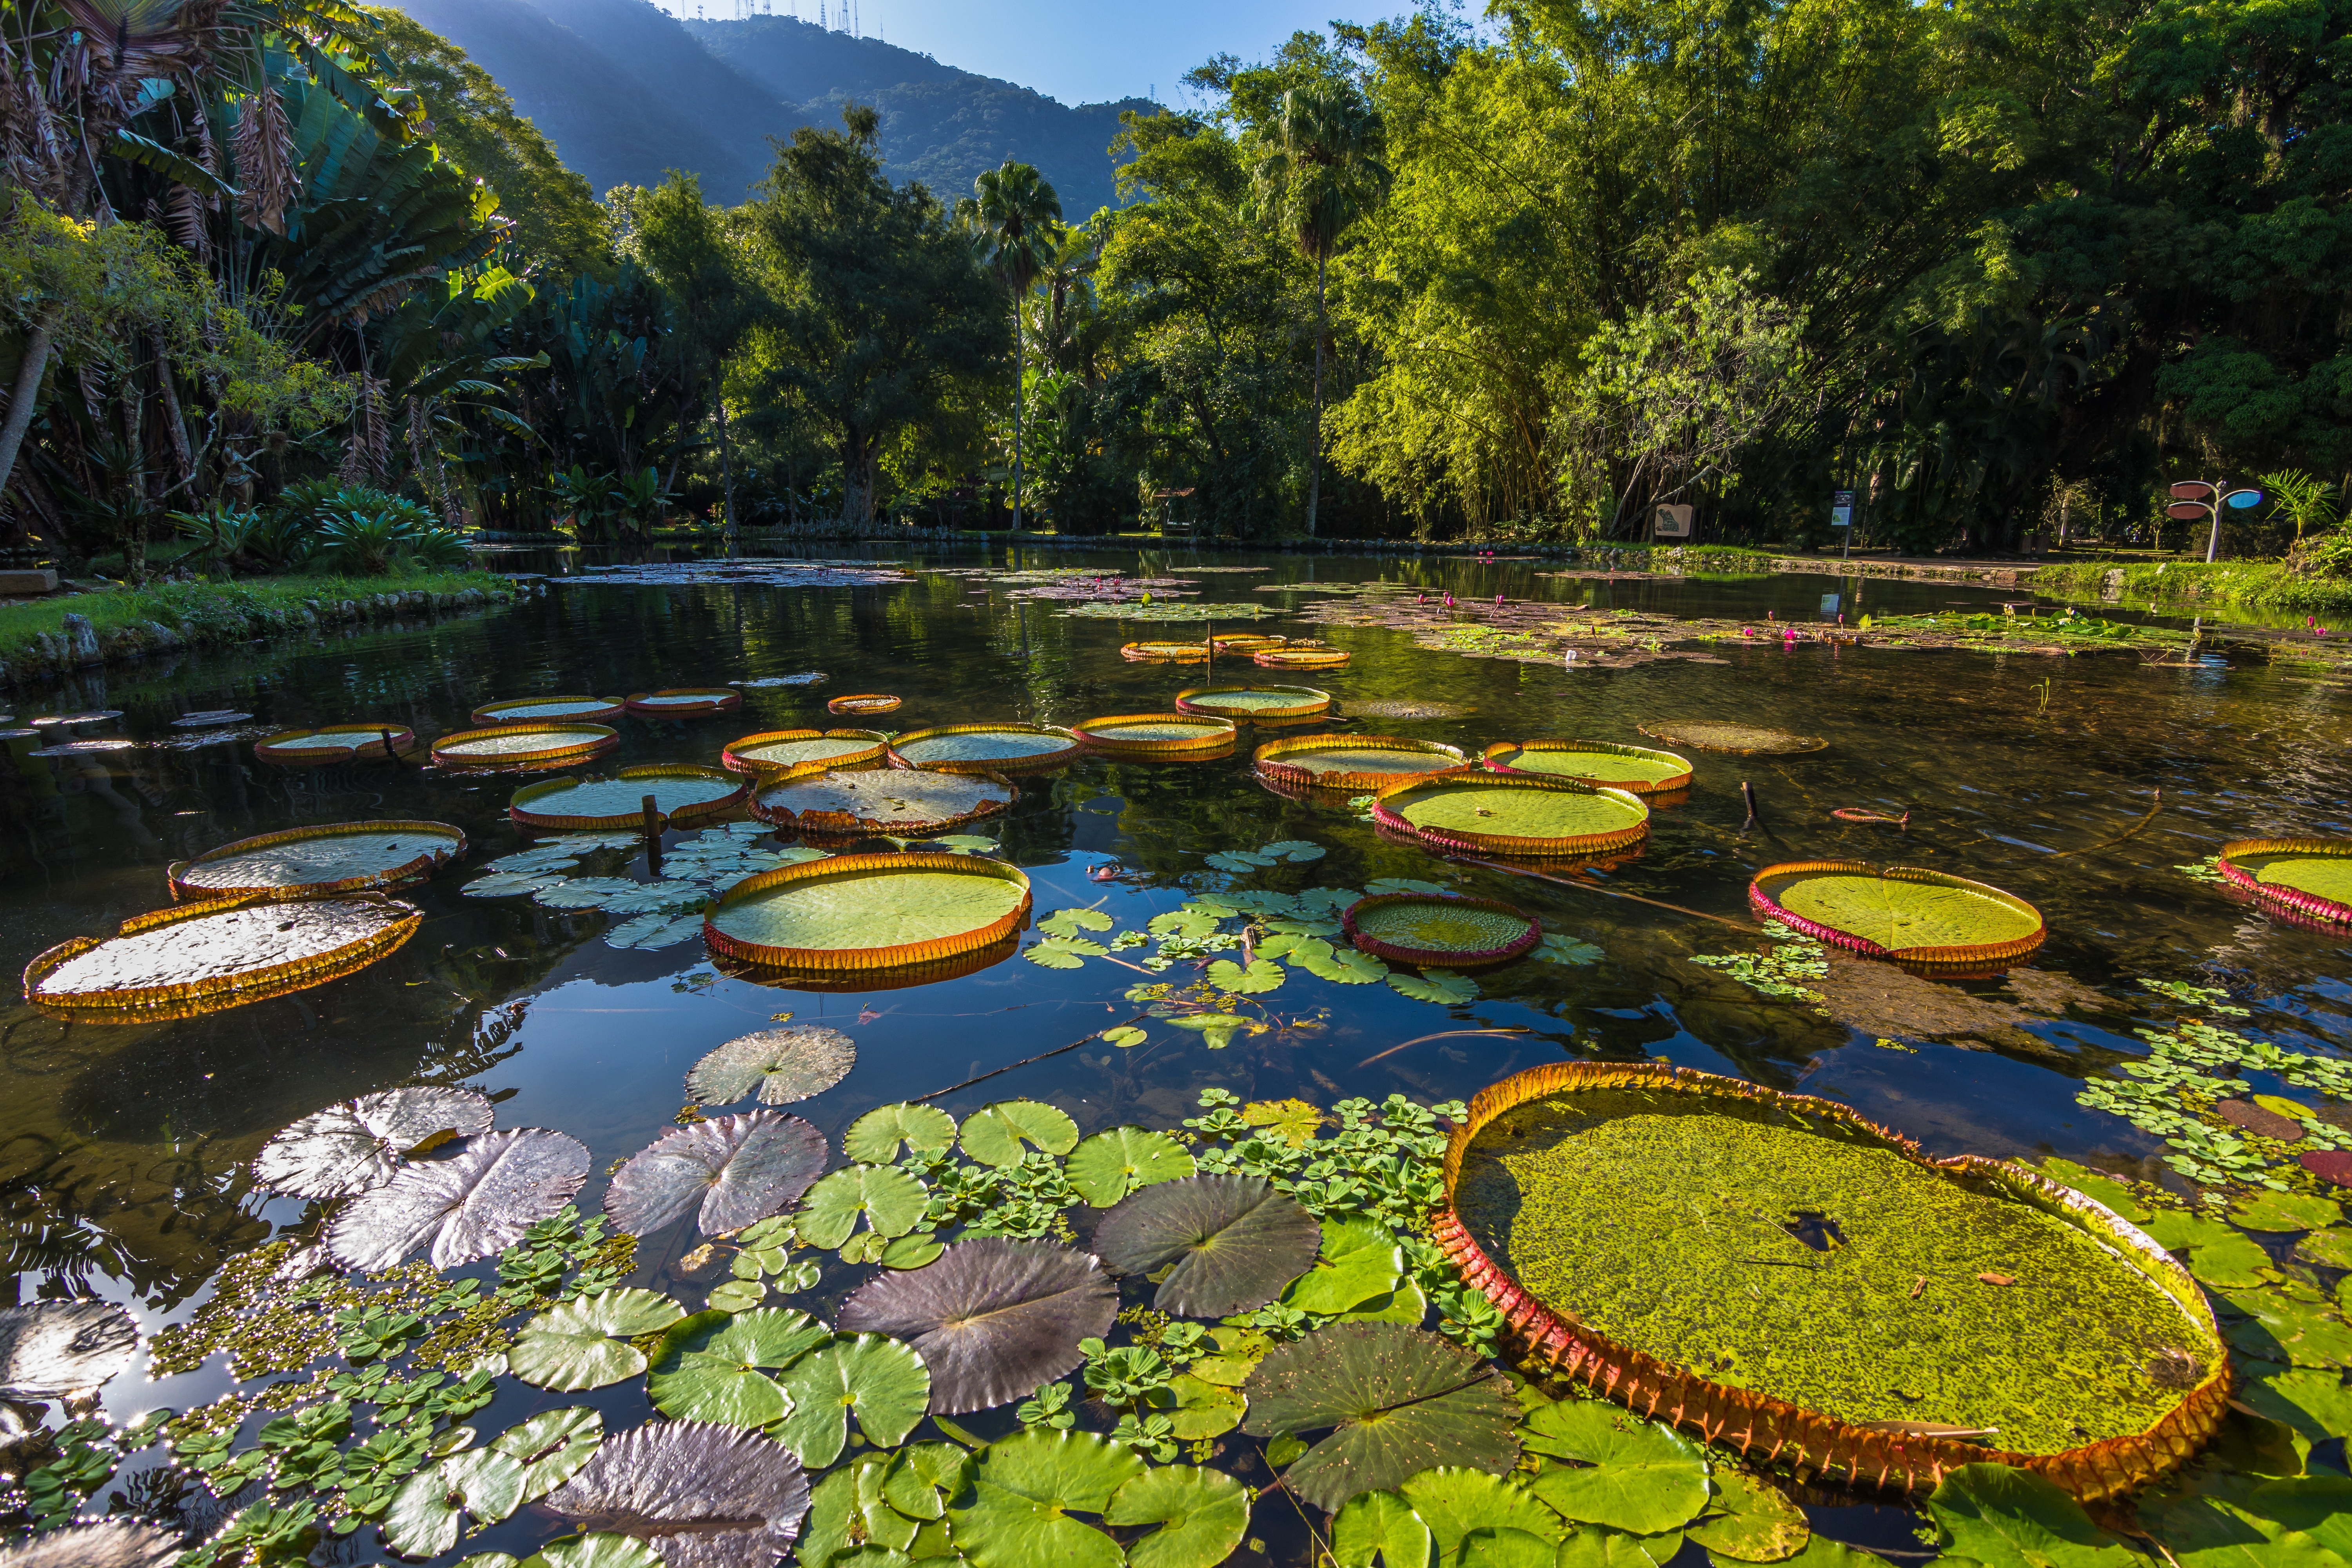 A pond surrounded by leafy trees. Large lily pads are dotted around the pond, which is reflecting the sky. In the background, behind the trees, mountains are visible.